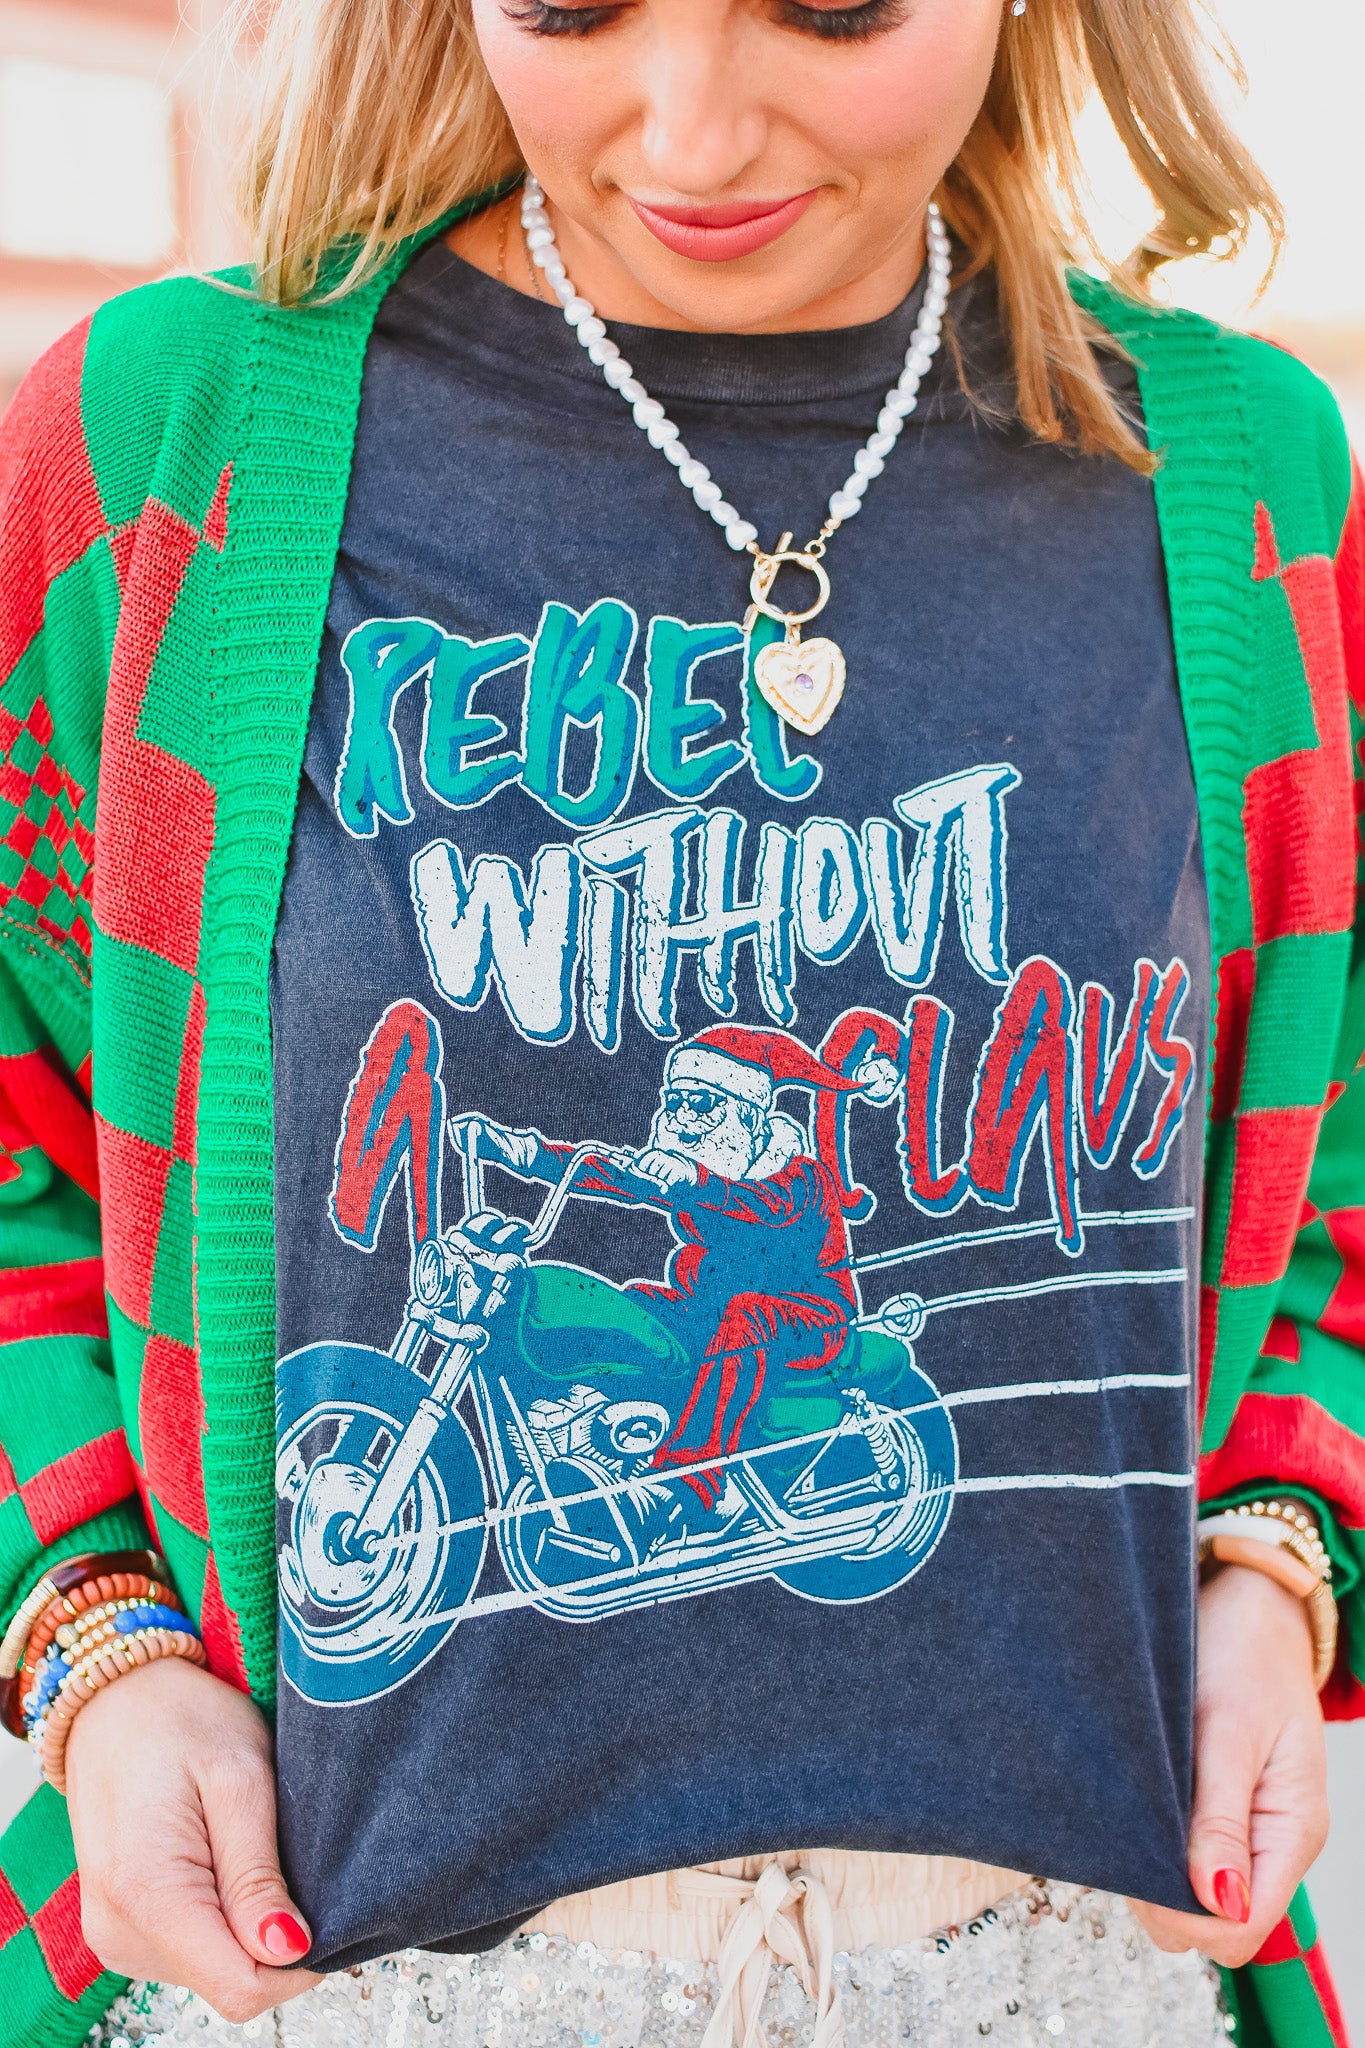 Rebel Without a Claus Graphic Tee - RESTOCK